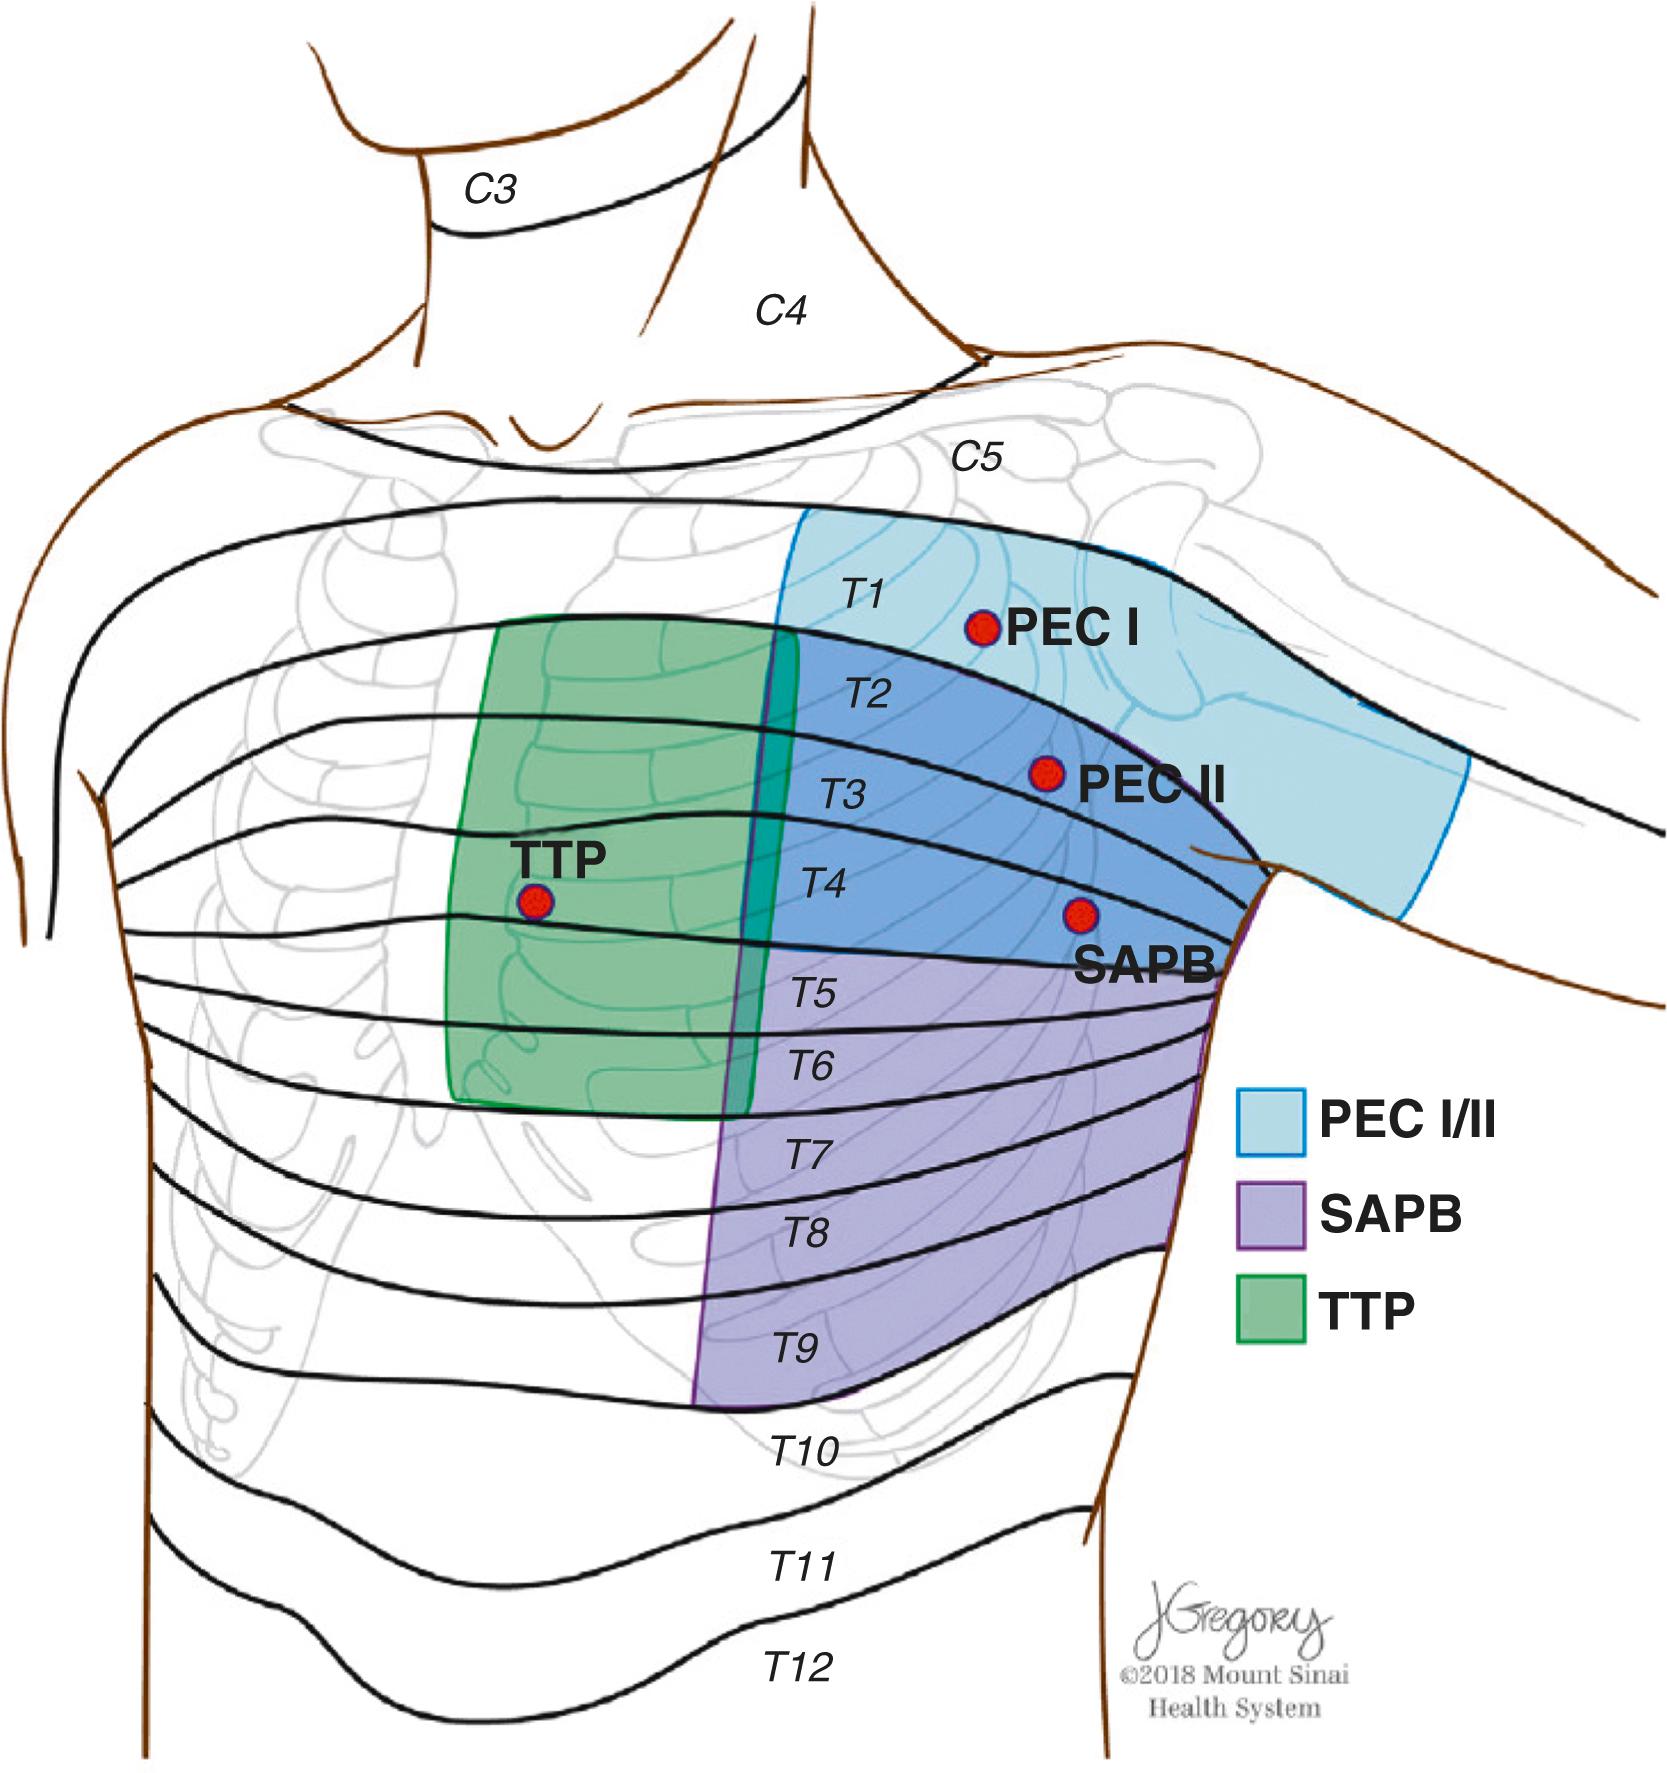 Figure 30.4, Illustration of the chest wall anatomy, including suggested regional block insertion sites and respective area and dermatomal distribution of expected sensory block. PEC , Pectoral nerve block; SAPB , serratus anterior plane block; TTP , transverse thoracic plane block.